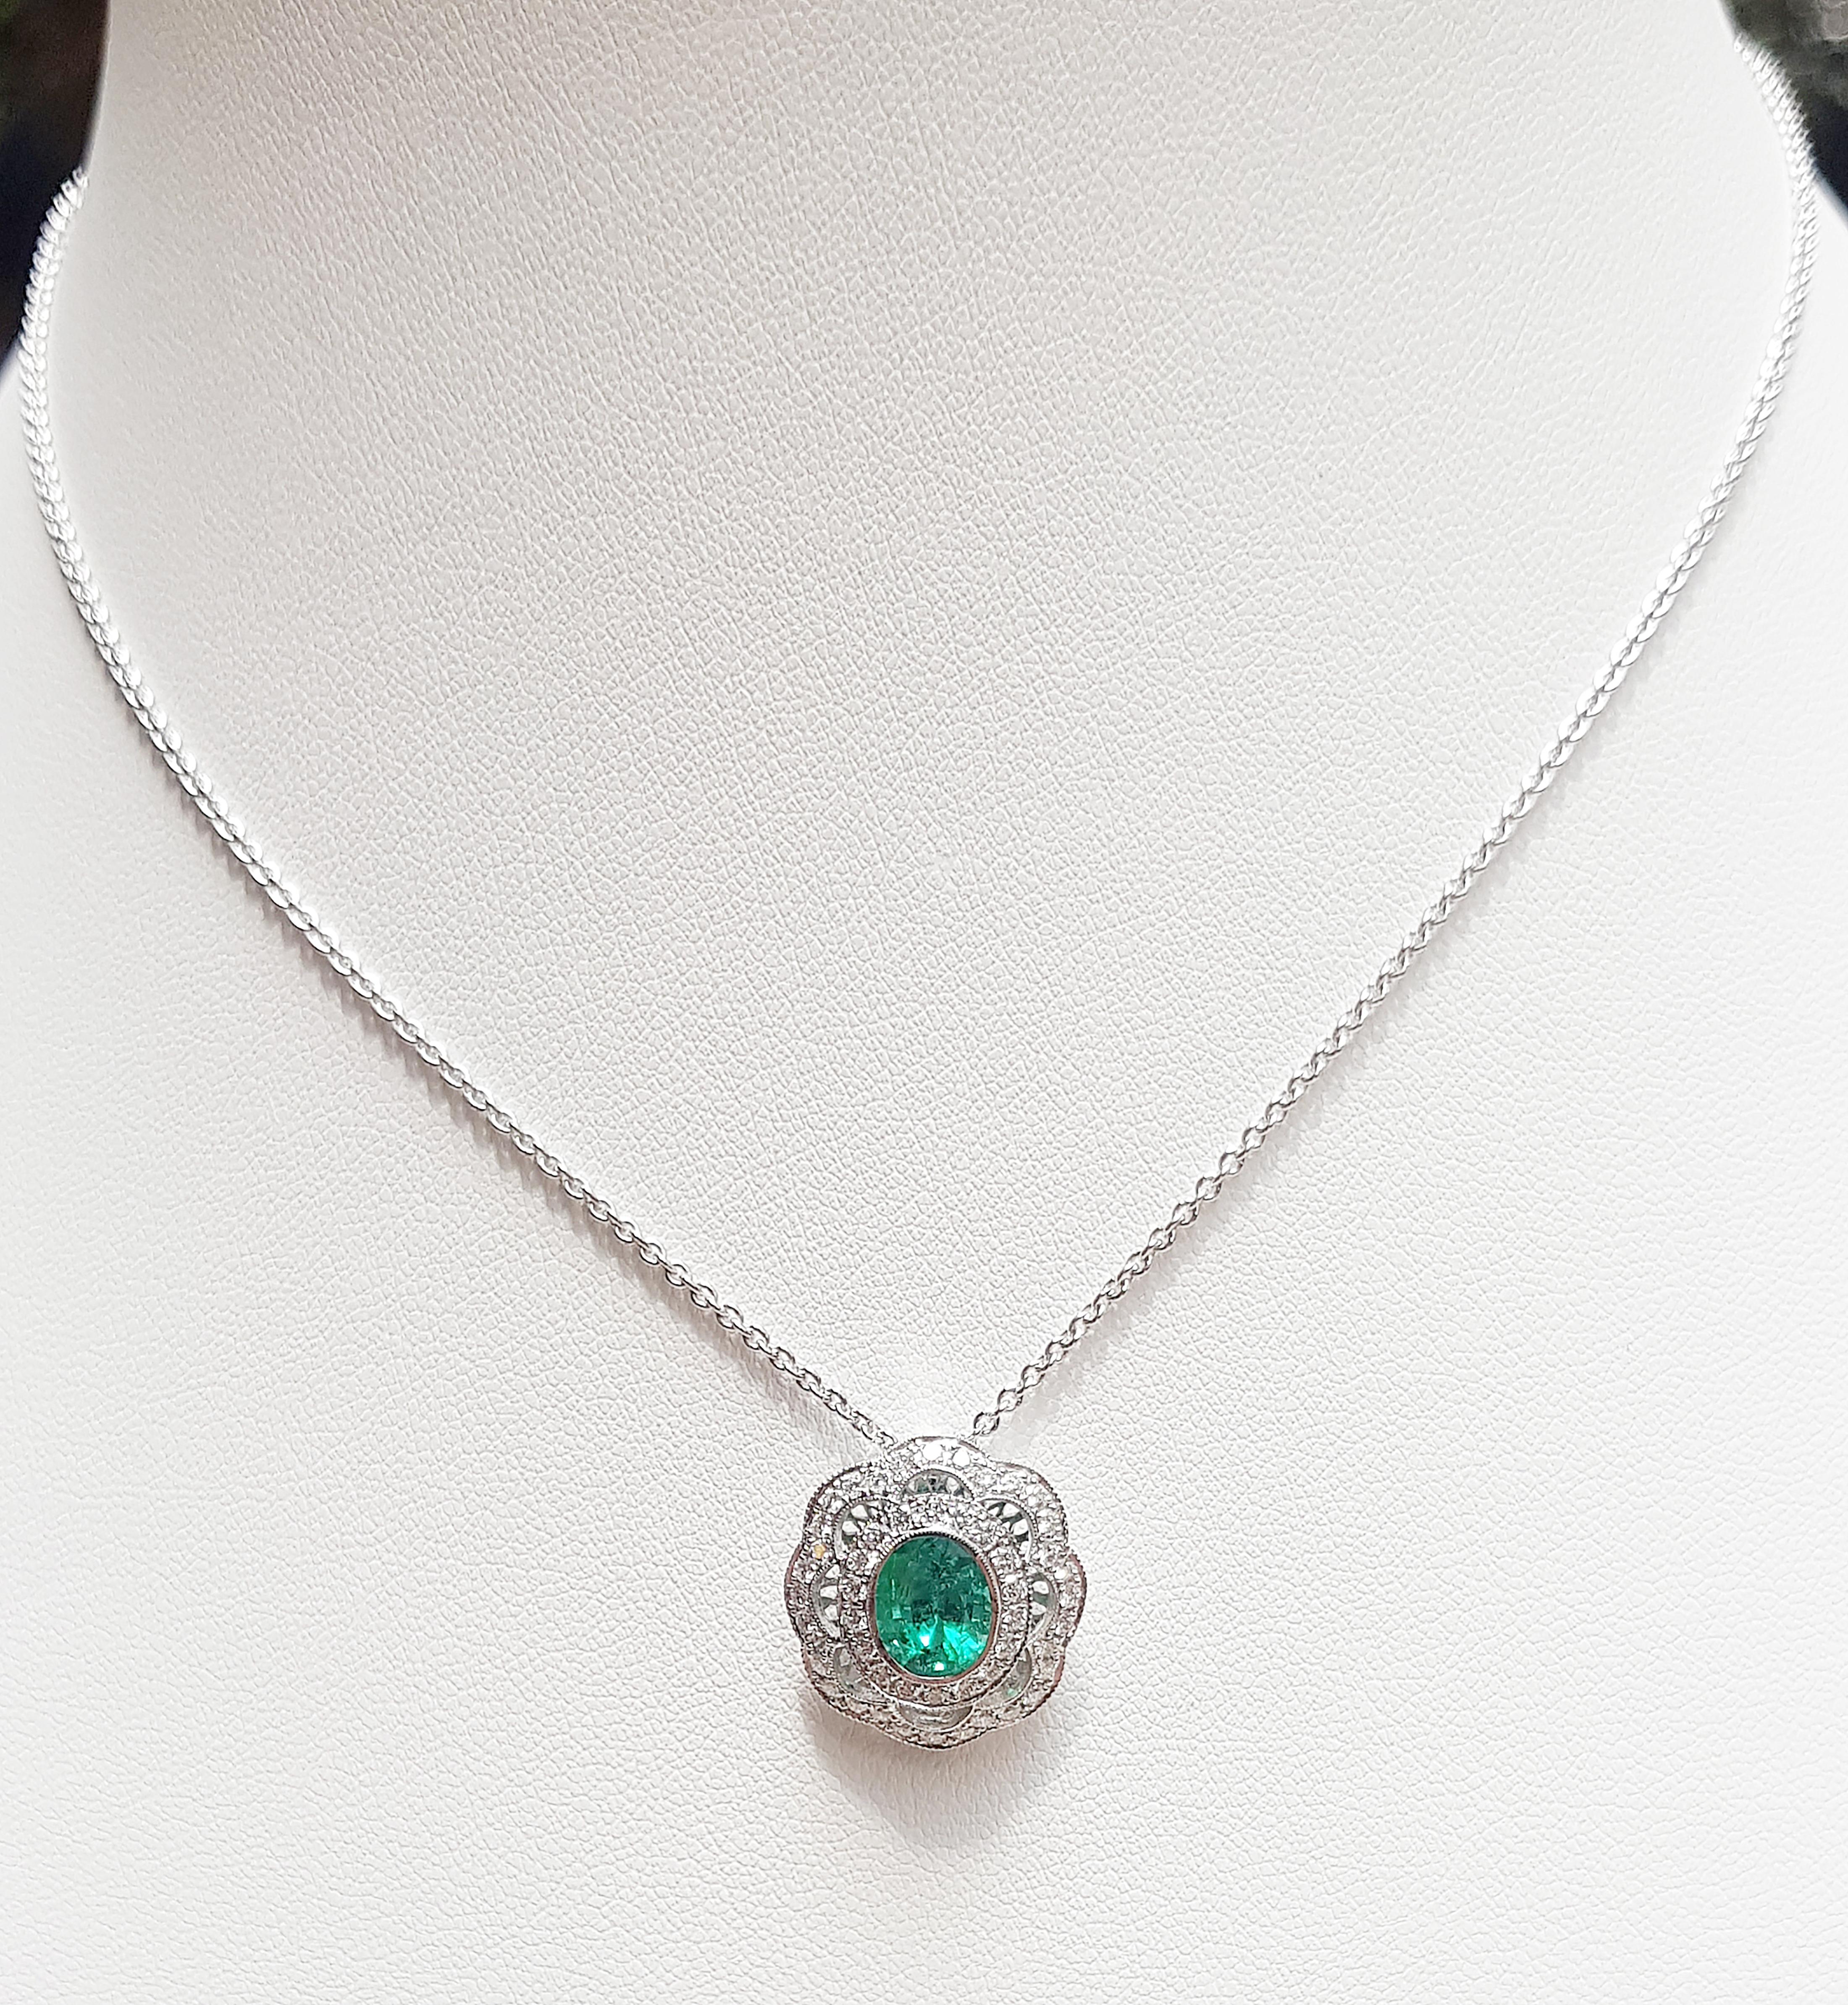 Emerald 1.46 carats with Diamond 0.59 carat Pendant set in 18 Karat White Gold Settings
(chain not included)

Width:  1.8 cm 
Length: 1.9 cm
Total Weight: 2.86 grams

